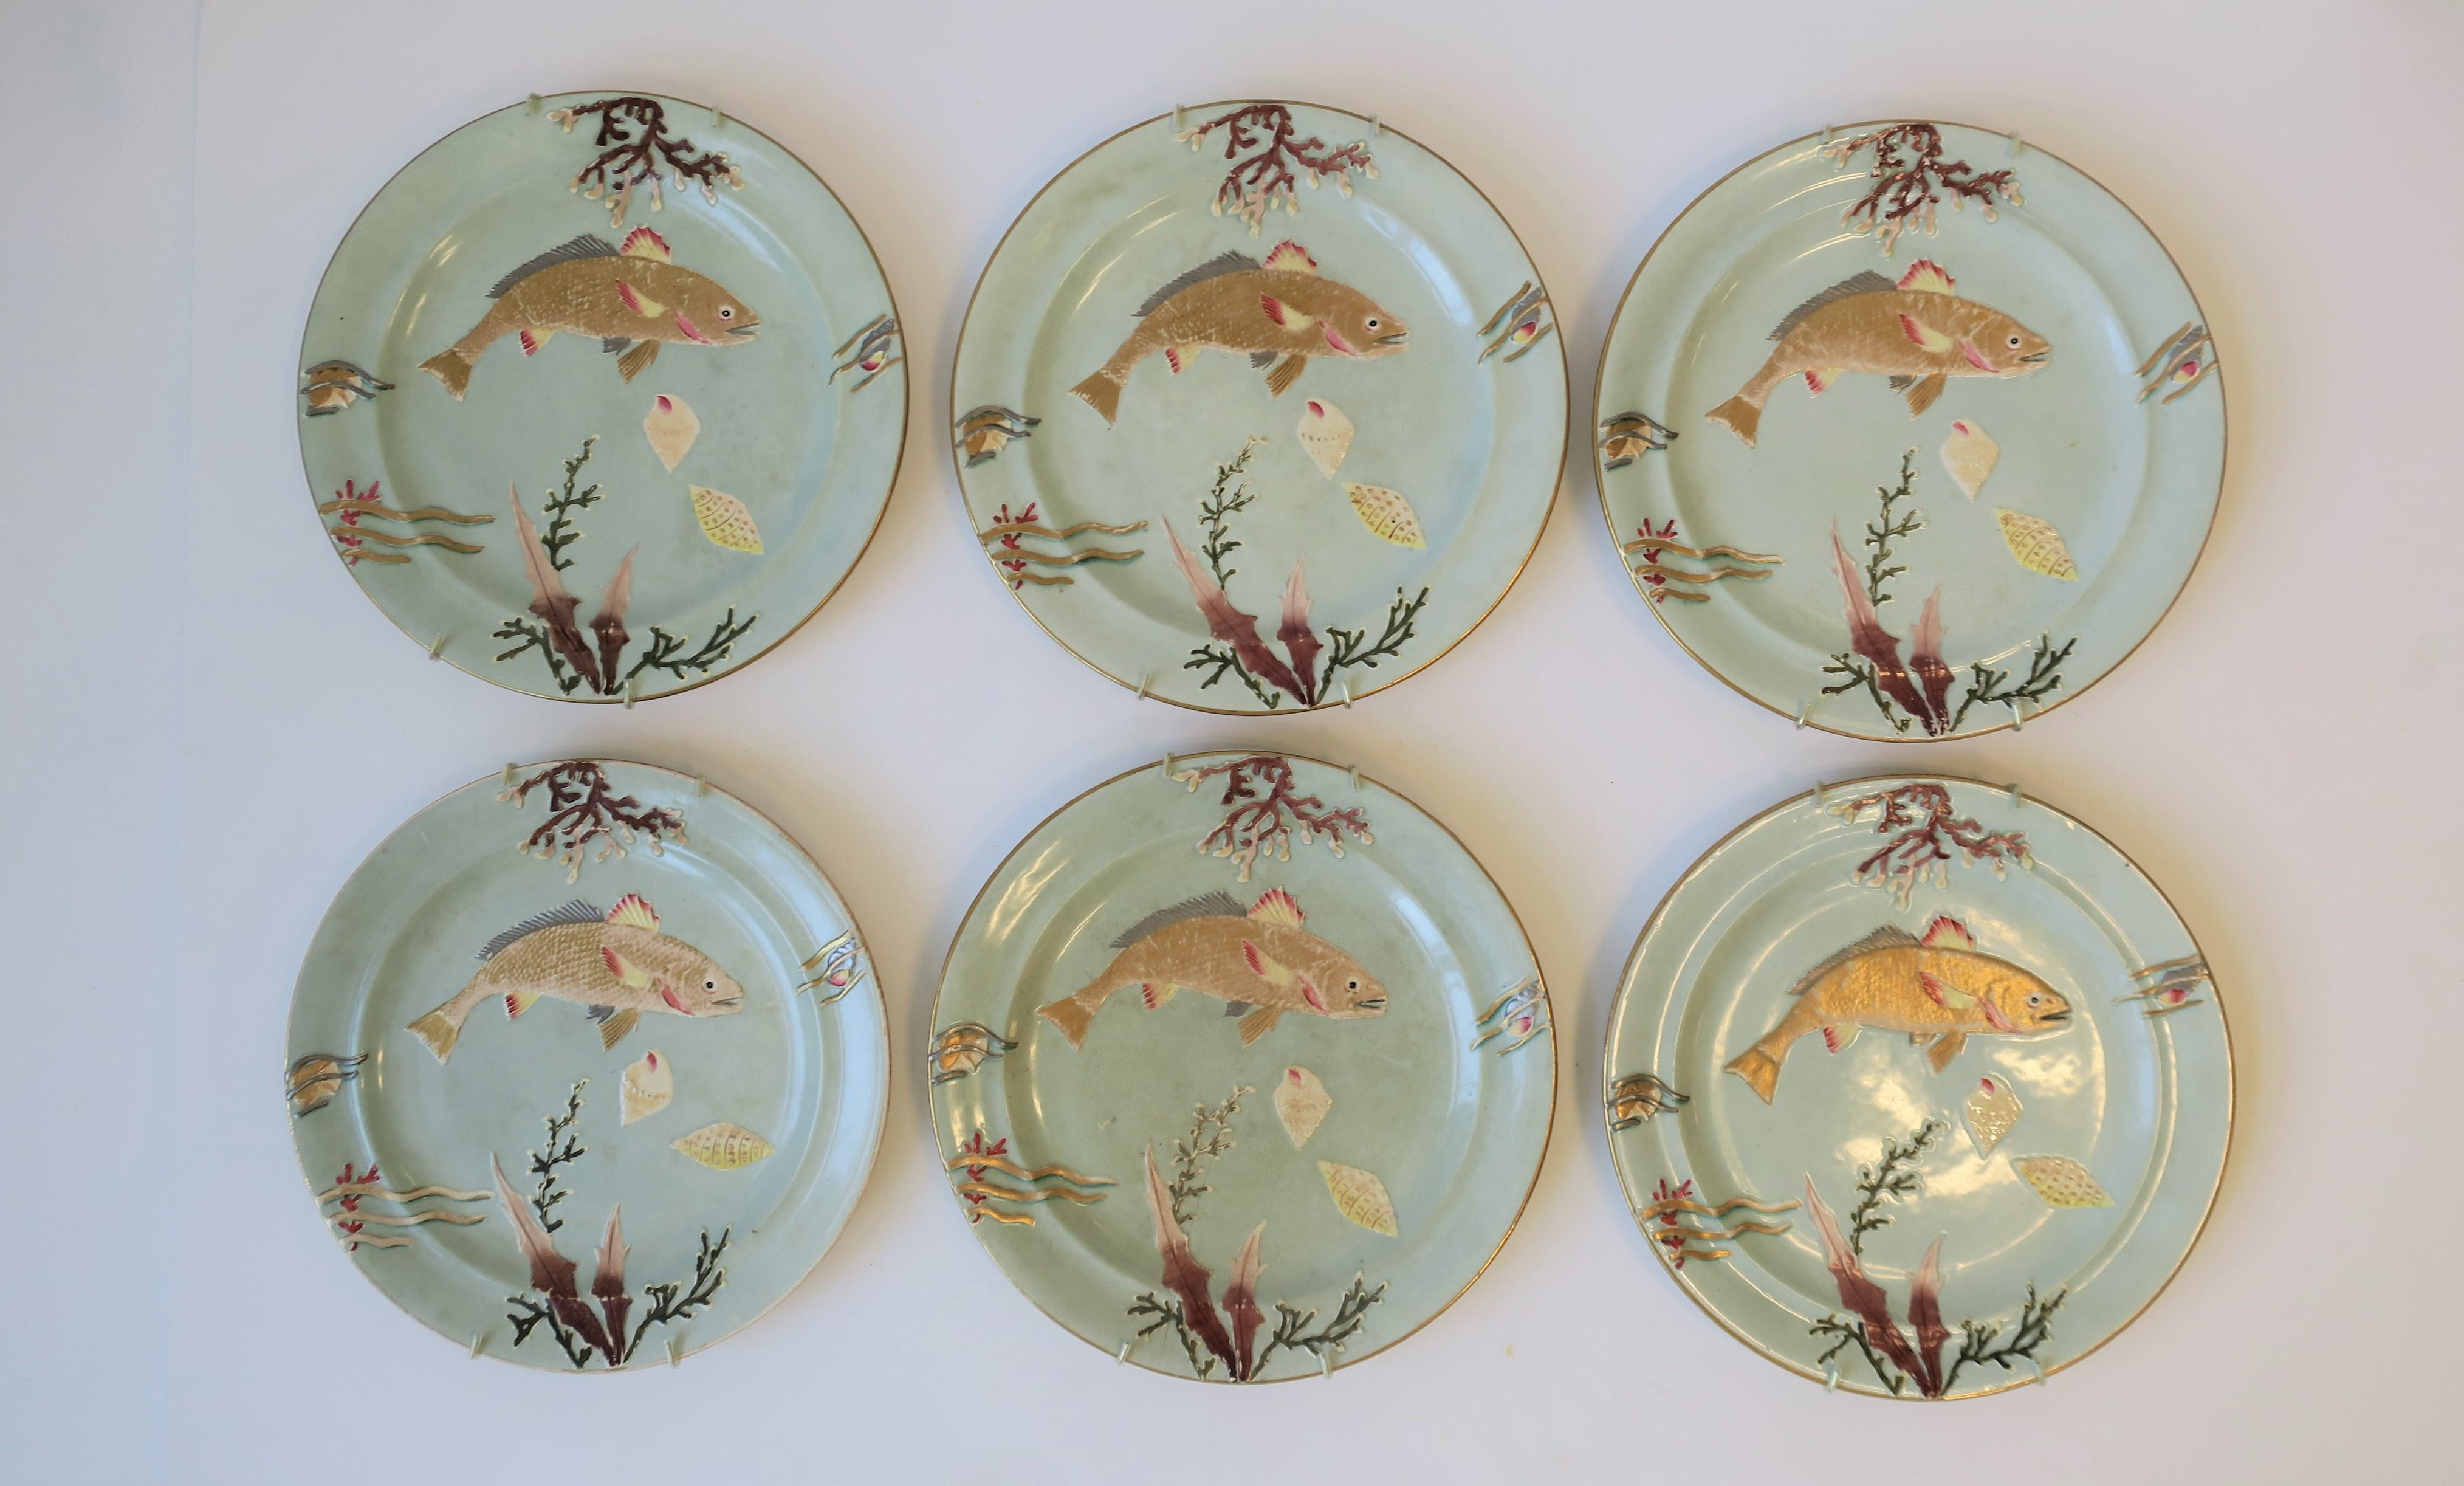 A very beautiful set of 6 antique dinner or lunch plates with gold bass fish and a coral seashell/sea shell raised relief design, circa early 20th century. Plates also come with six wall brackets for hanging if so desired. Colors include: seafoam